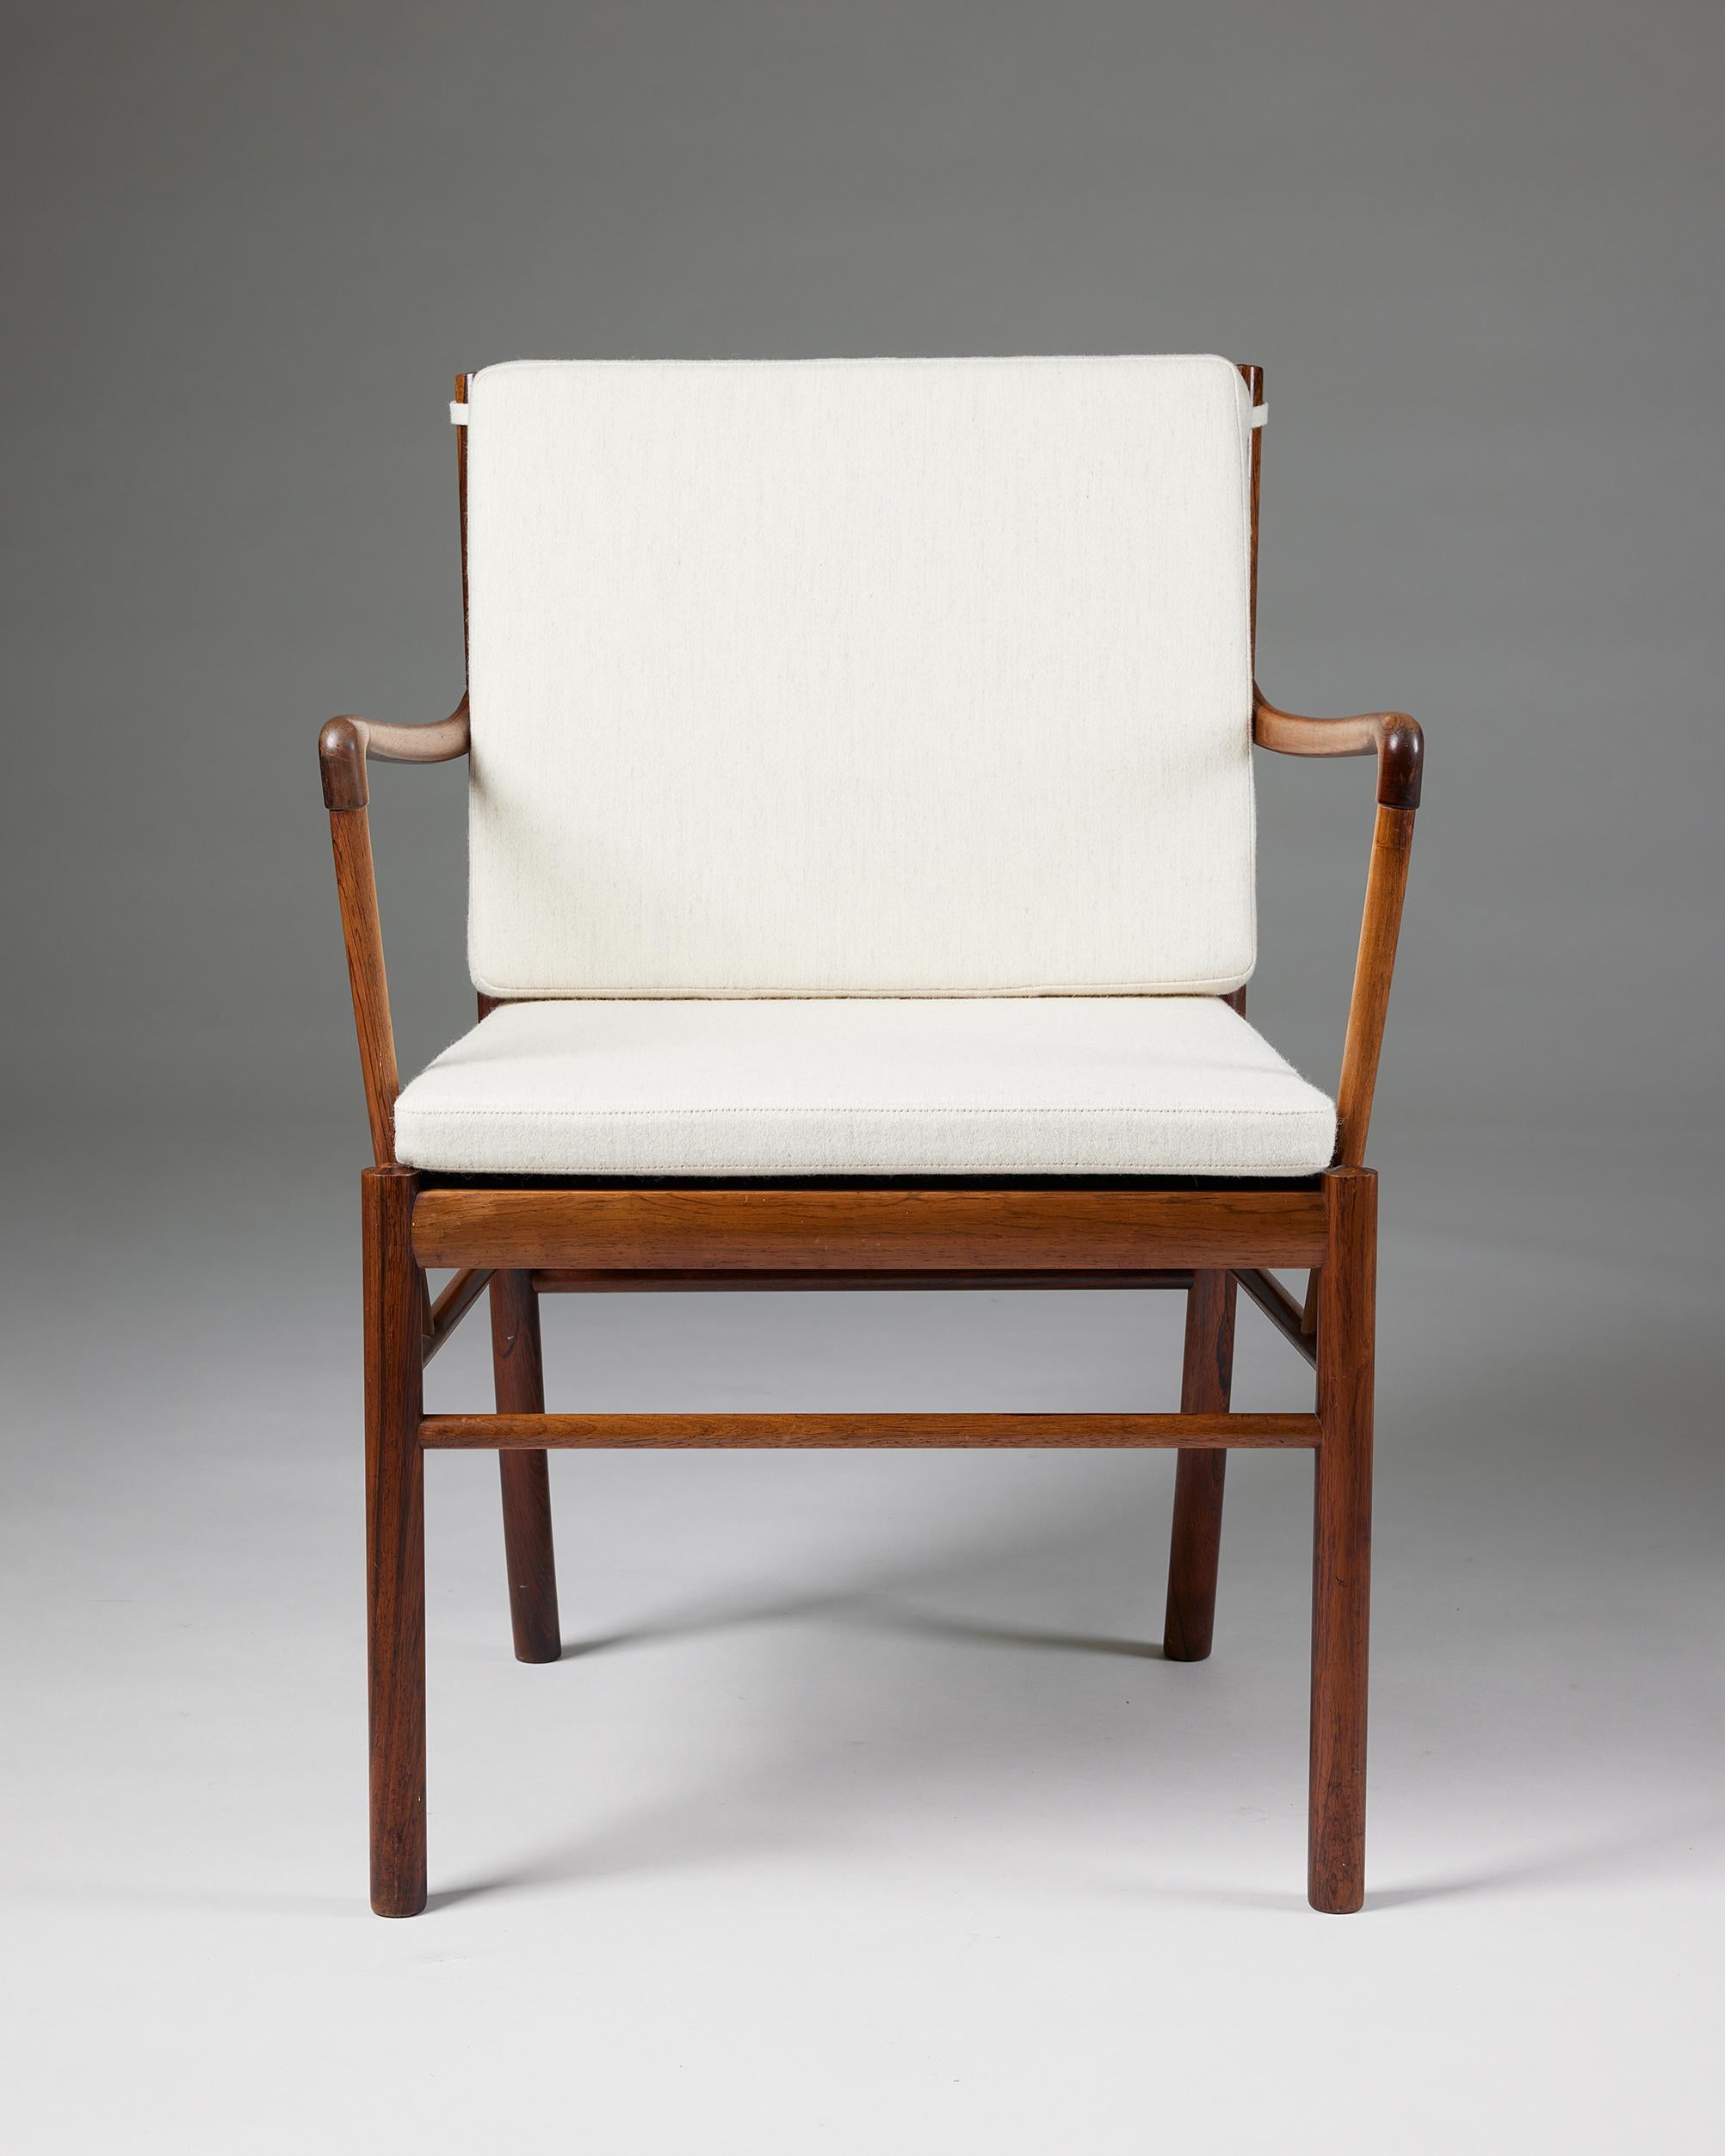 Danish Armchair �‘Colonial’ Designed by Ole Wanscher for Poul Jeppesen